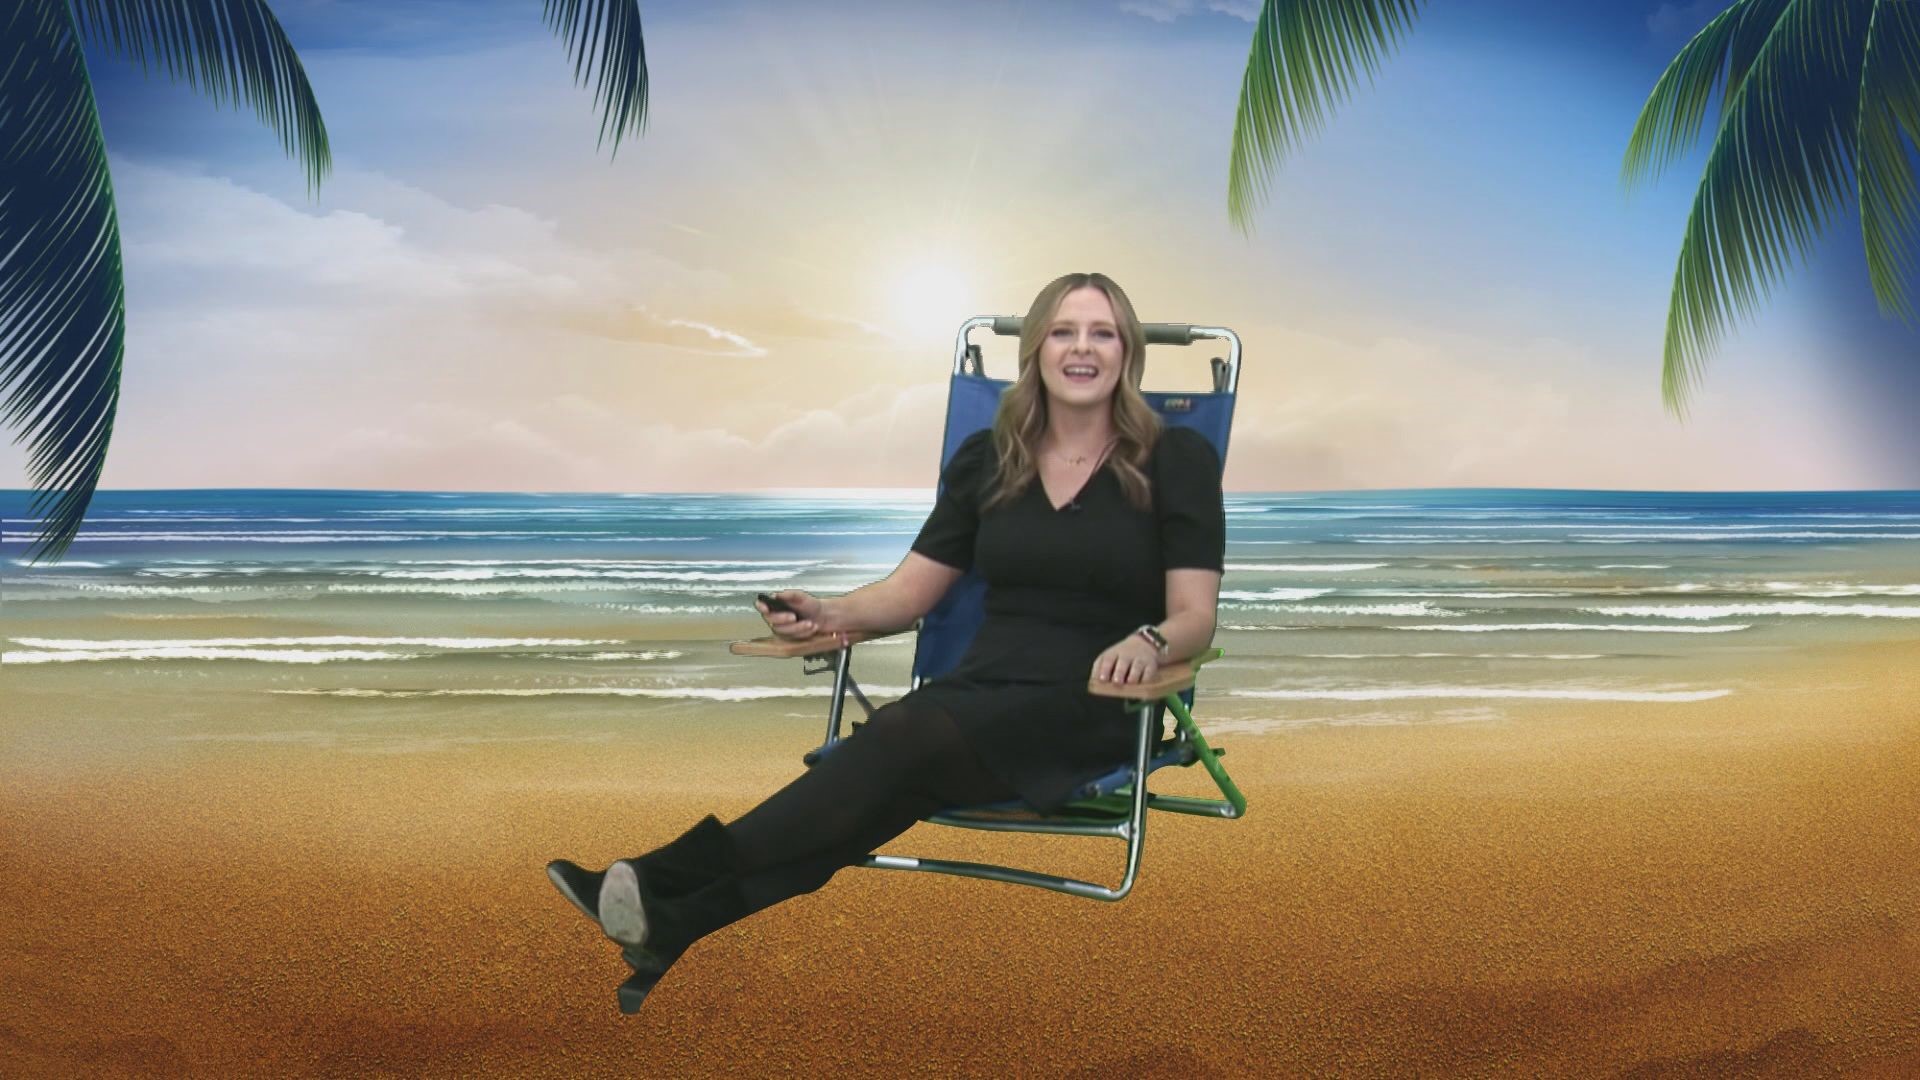 Stacey Spivey reminds everyone they deserve a vacation whether it’s big or small.